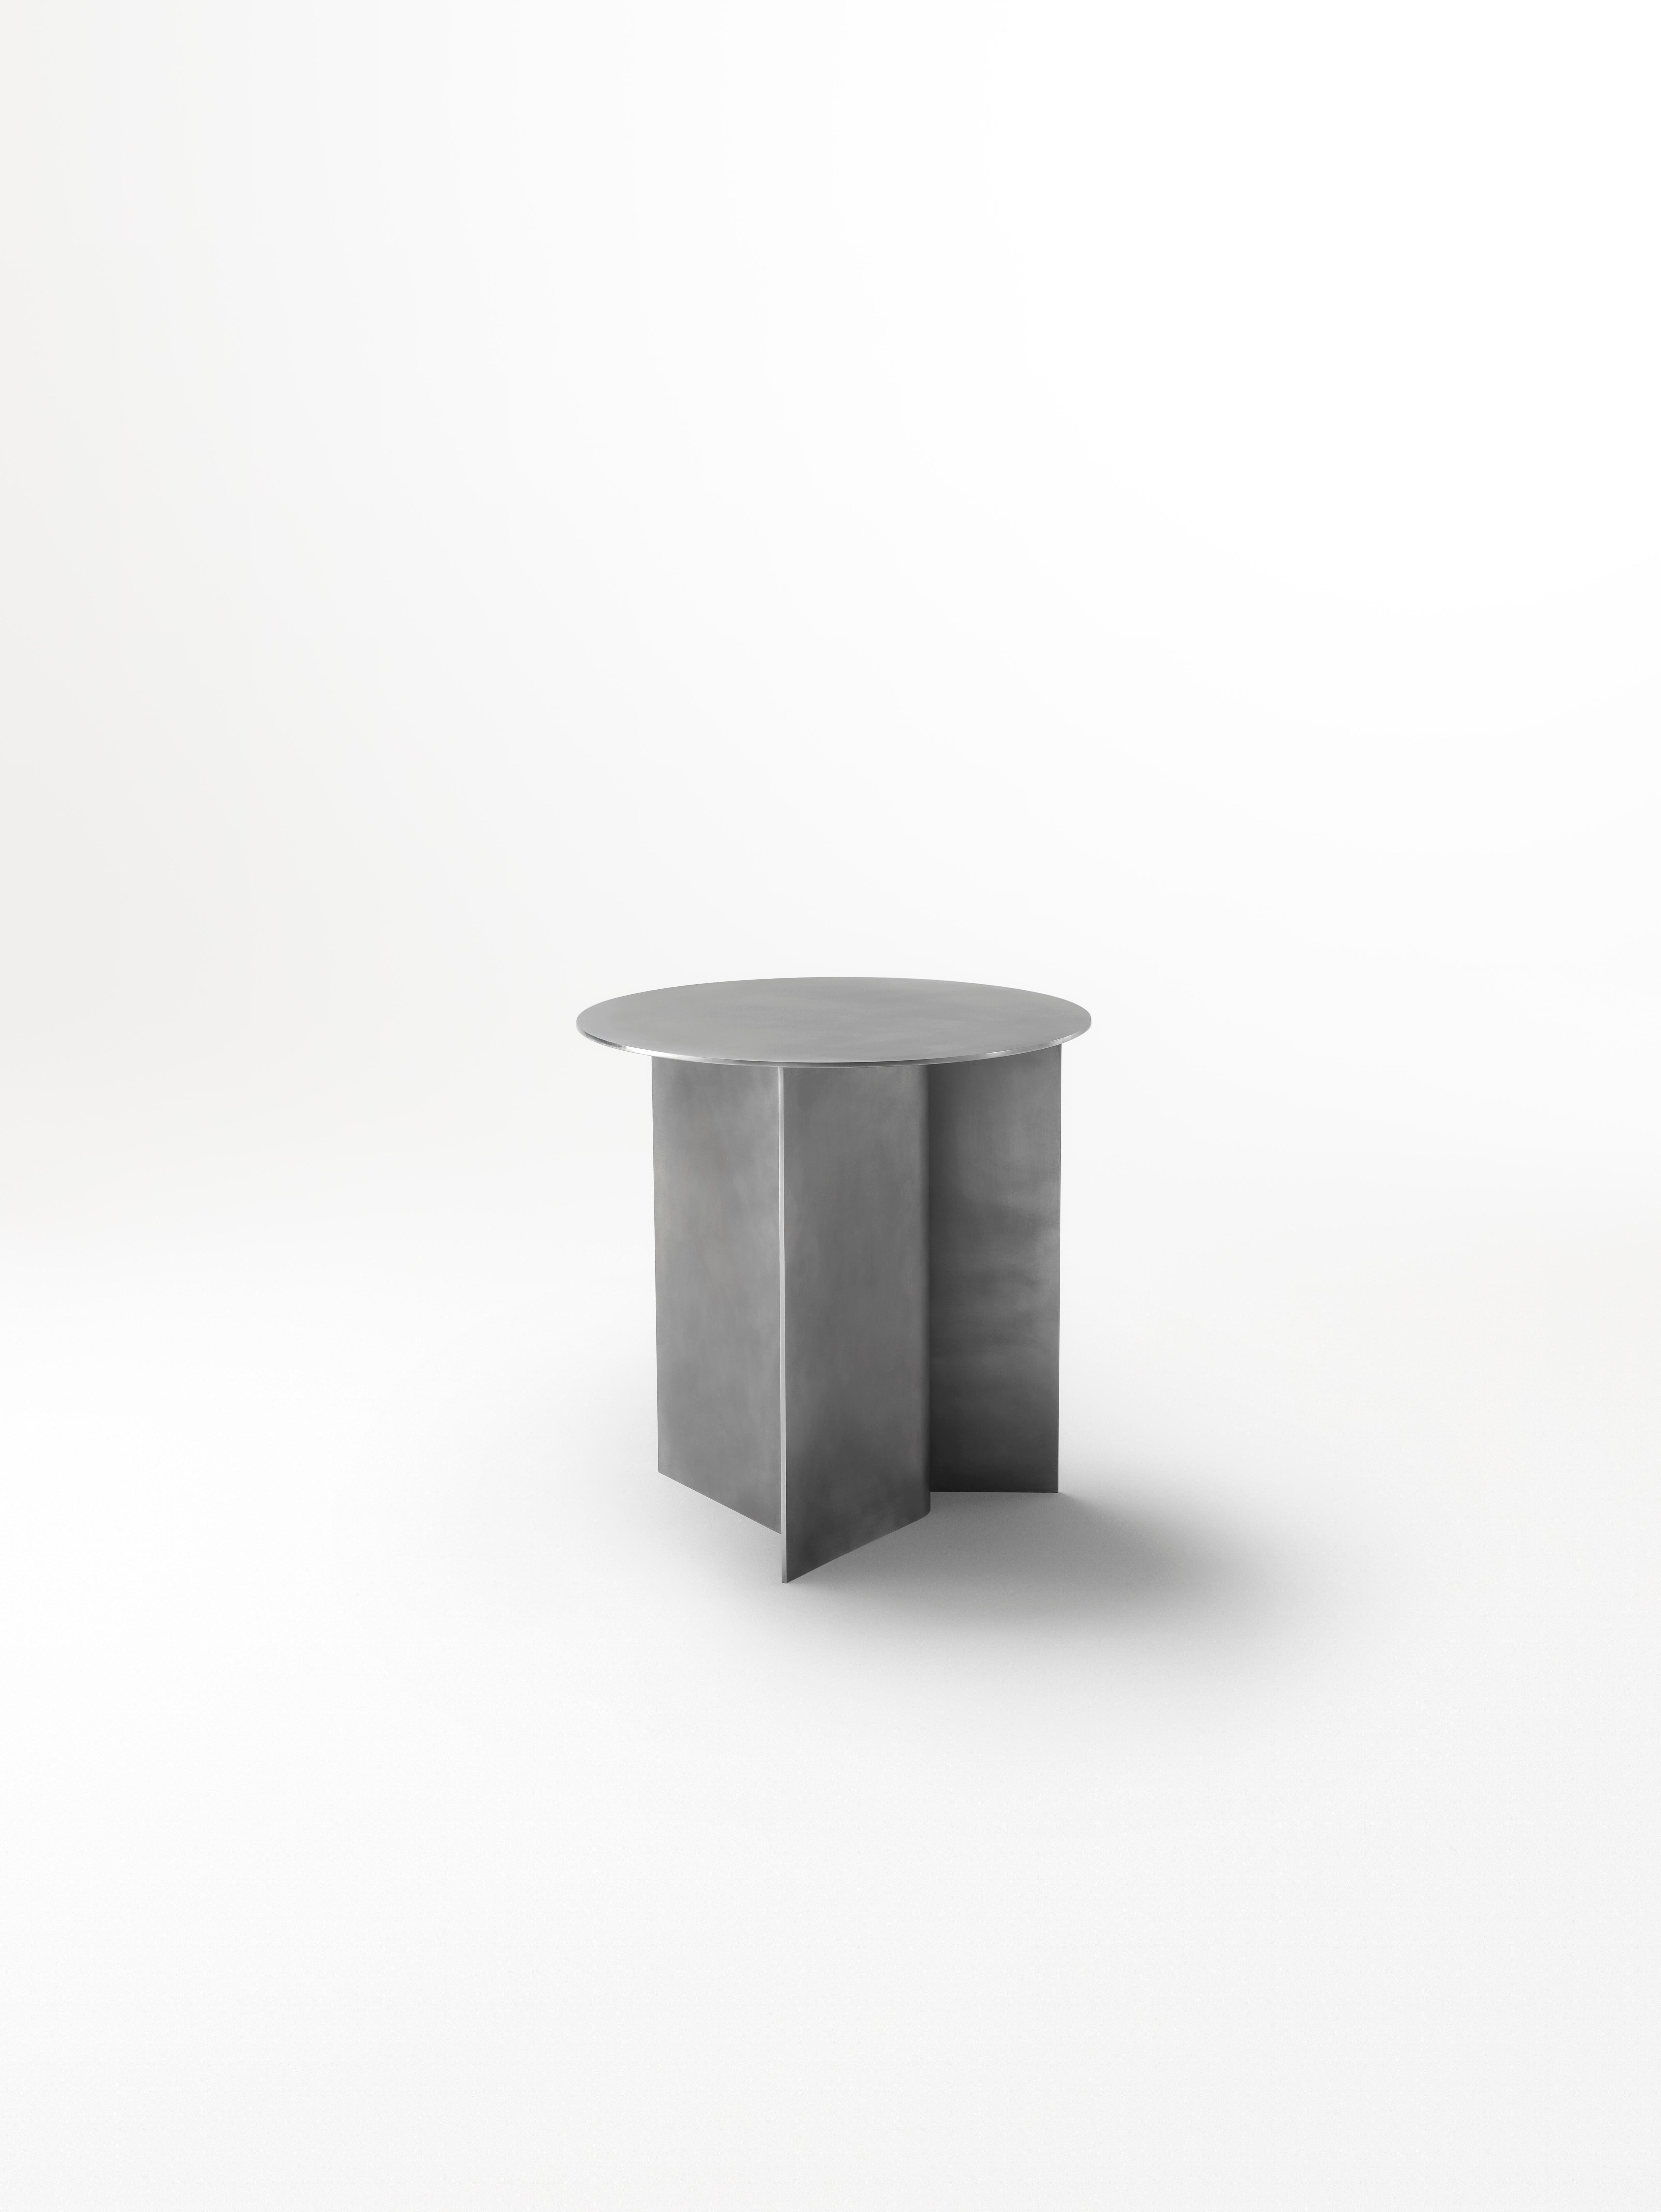 Breeze explores the divergence of mass planner forms and the subtle light play produced.

The breeze side table is presented in raw aluminium with the edges of each element hand polished and buffed to a mirror finish. The planner surfaces of the